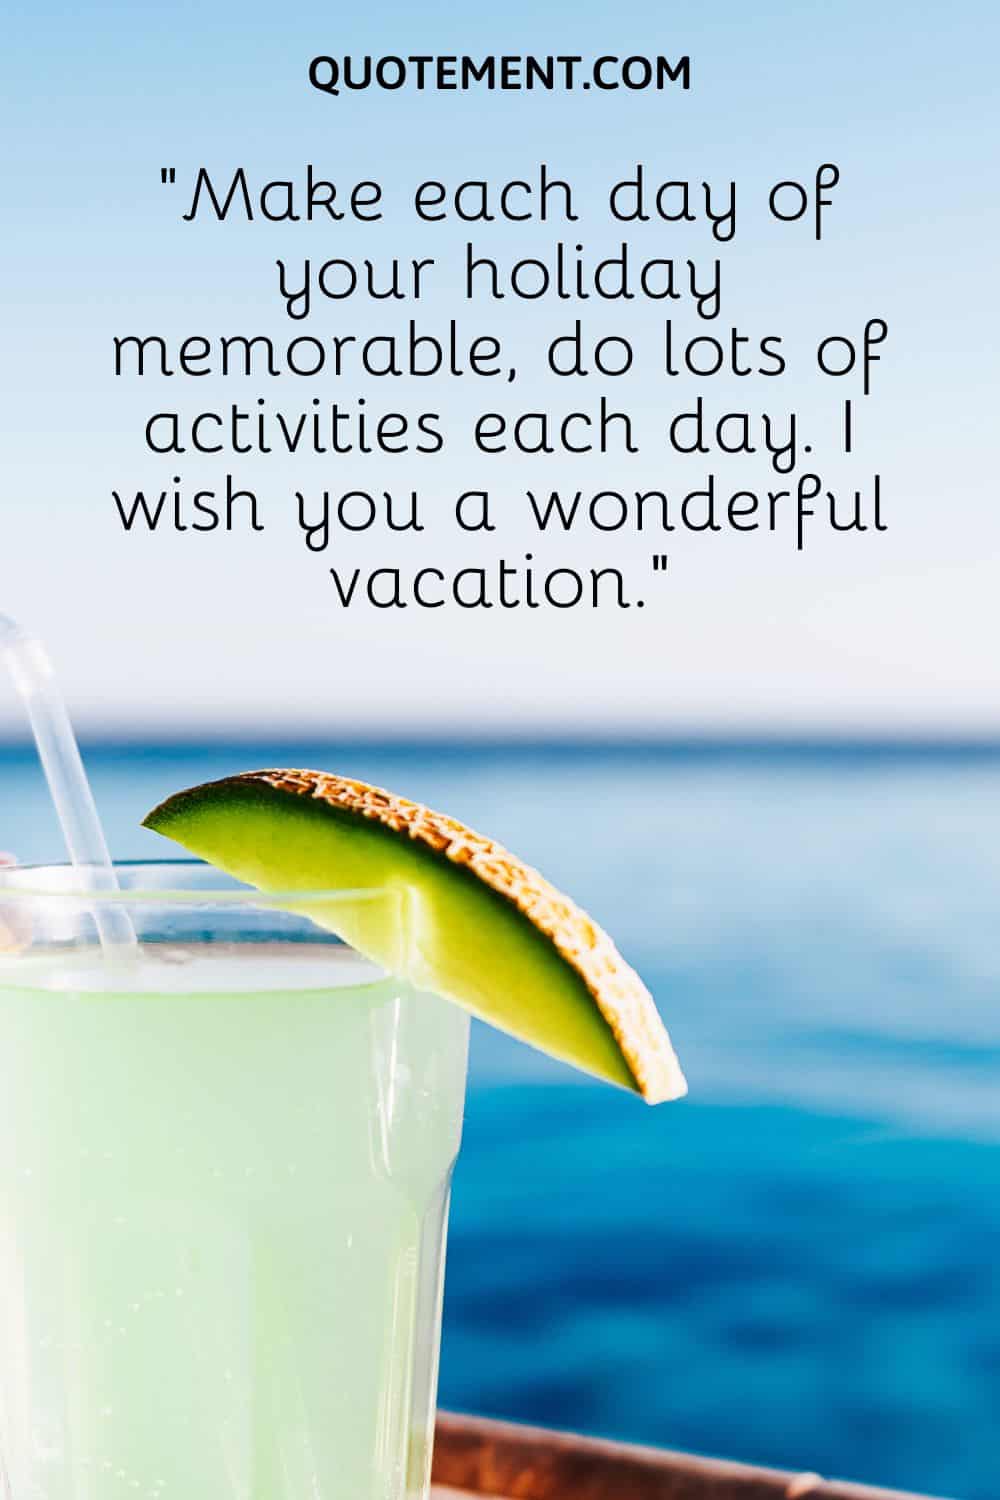 Make each day of your holiday memorable,